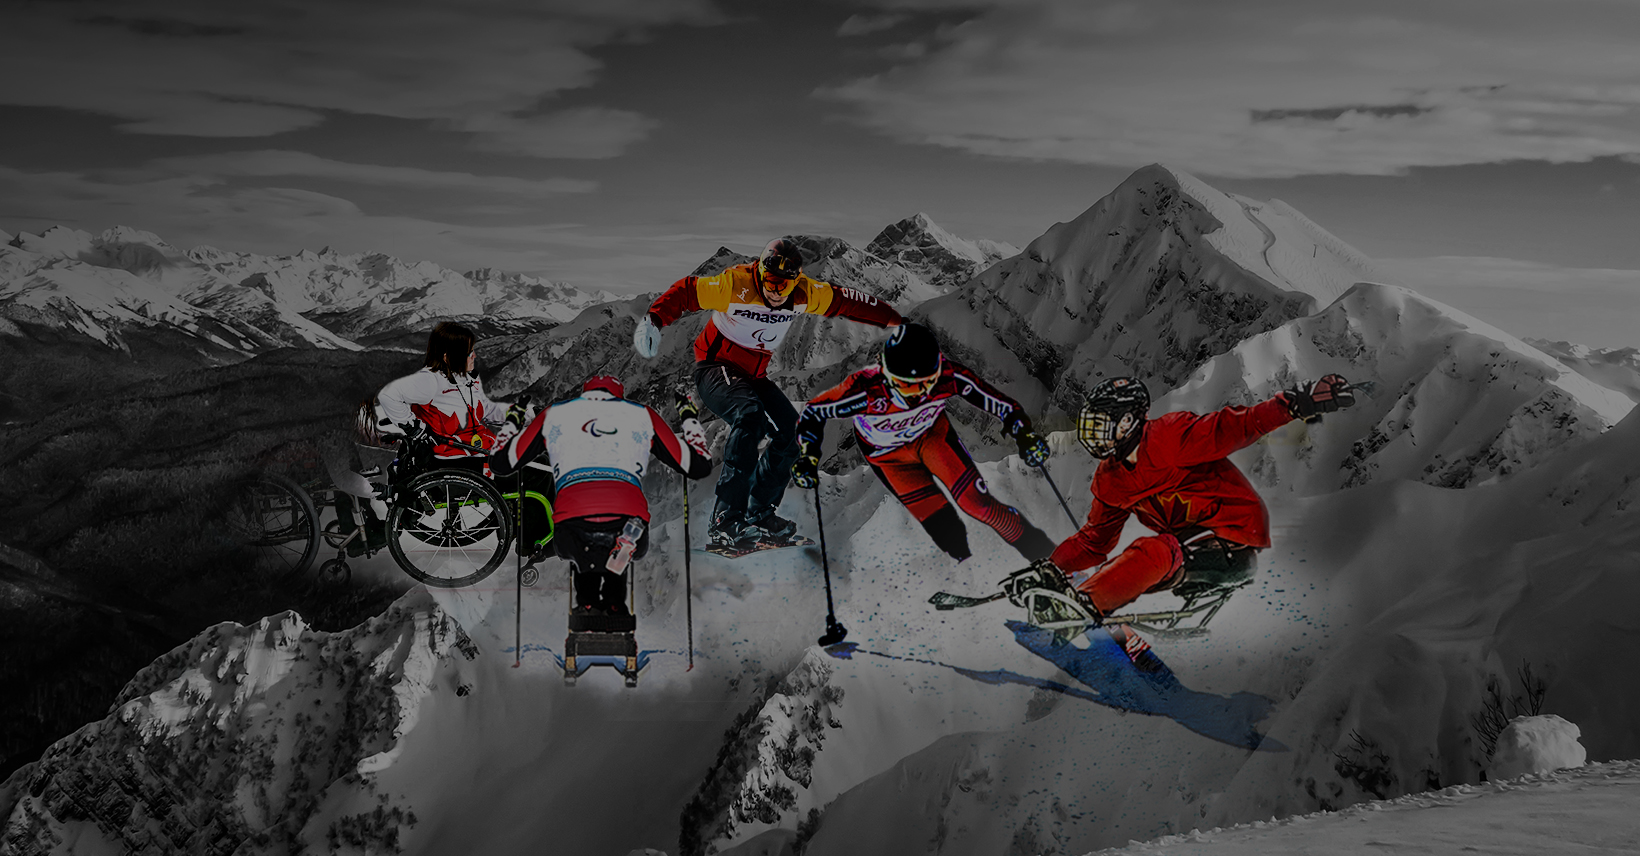 Beijing with 5 athletes over a mountain background. Mountain is black and White, athletes are full colour